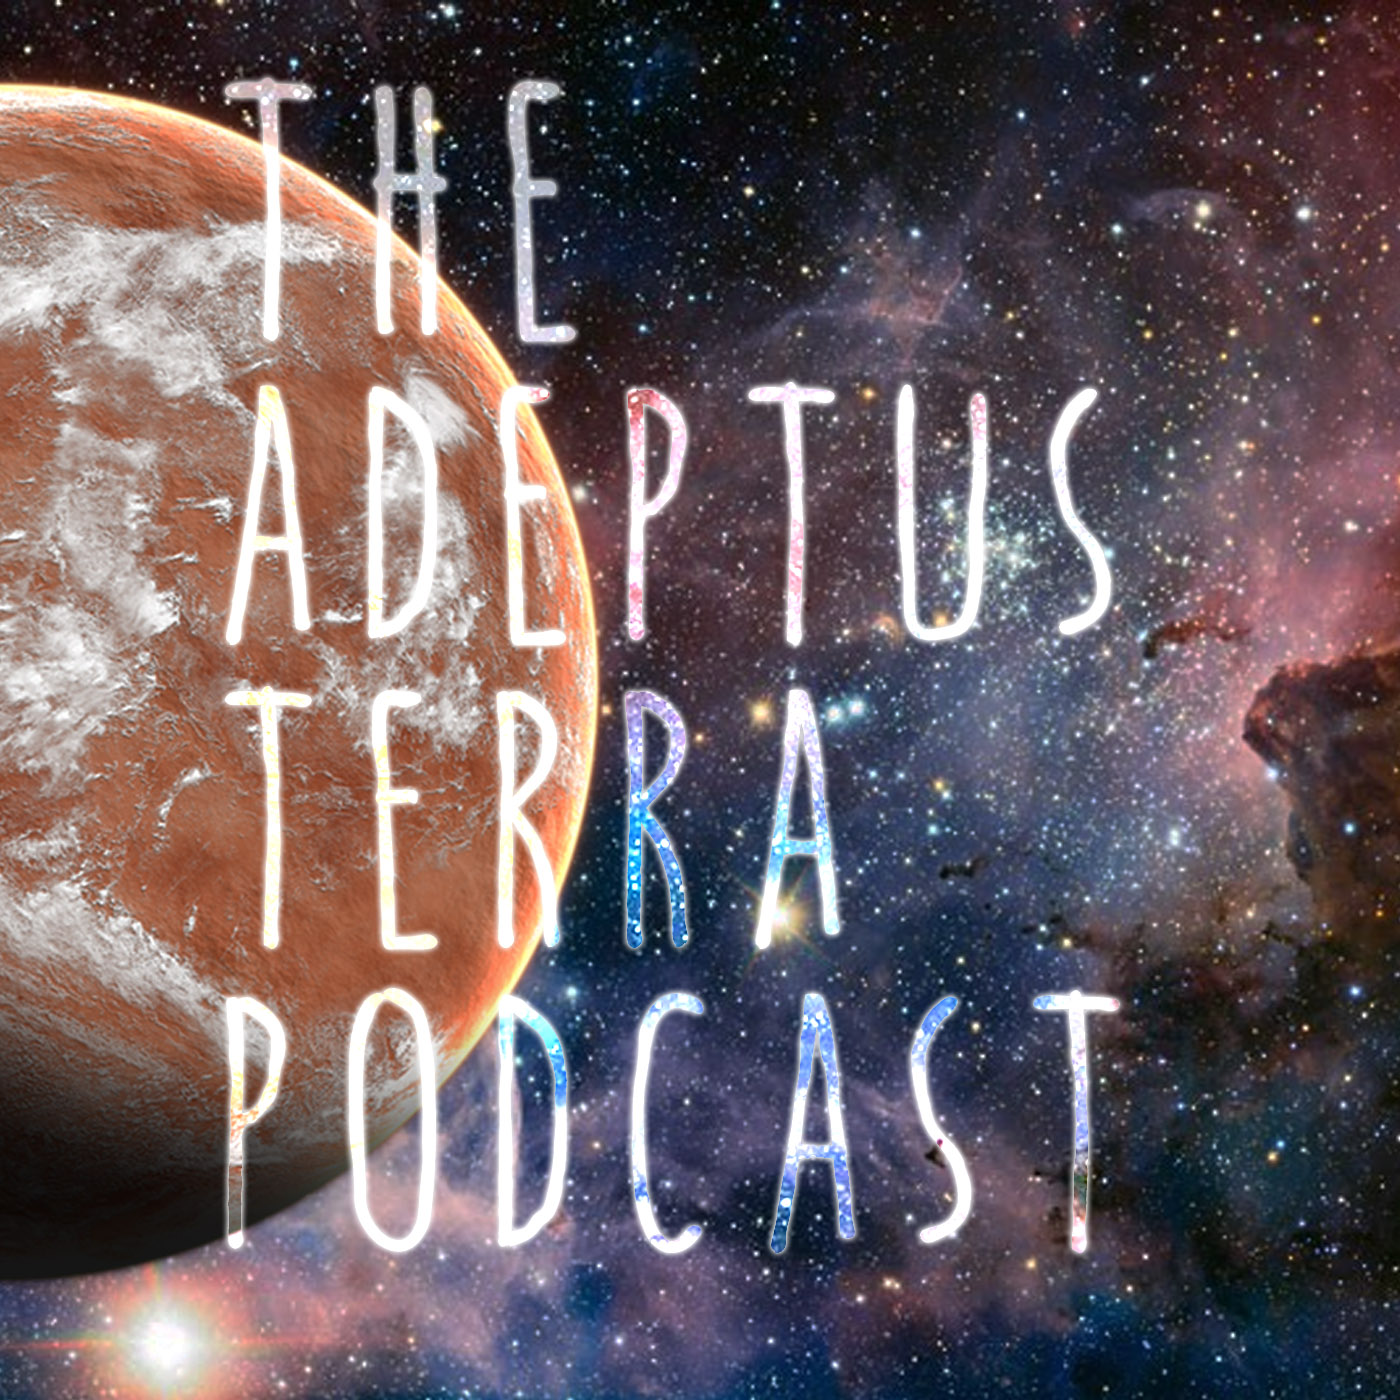 The Adeptus Terra Podcast Episode 14 'She takes her rock everywhere'